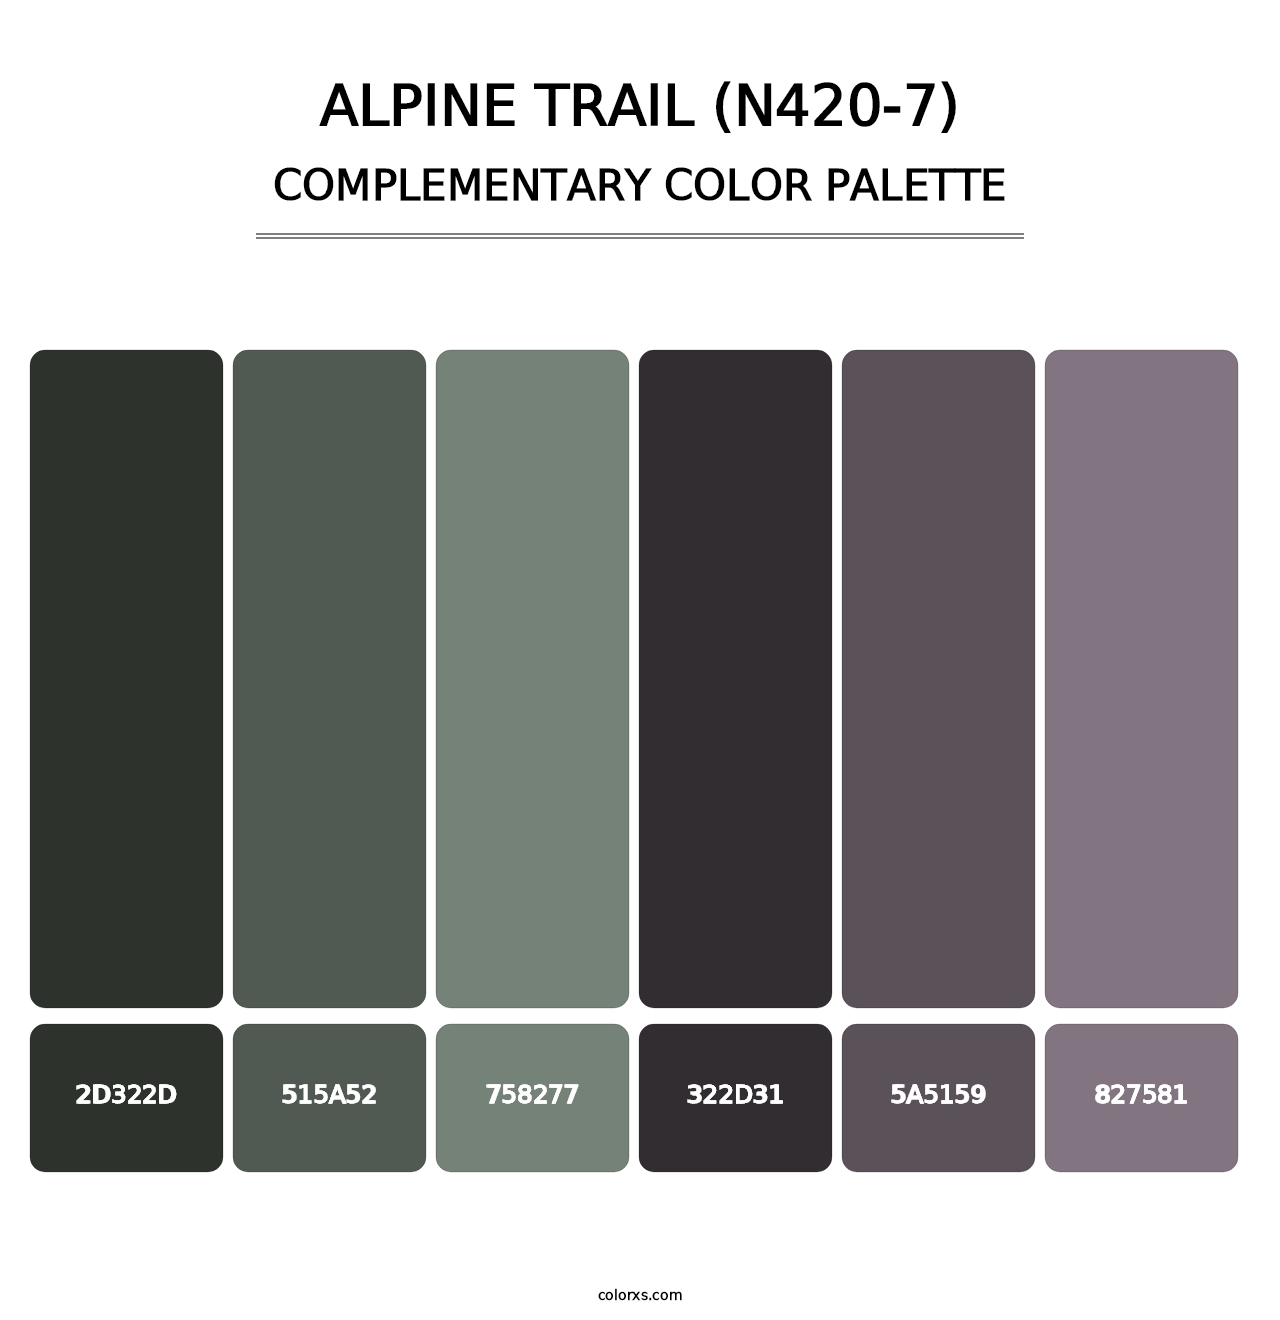 Alpine Trail (N420-7) - Complementary Color Palette